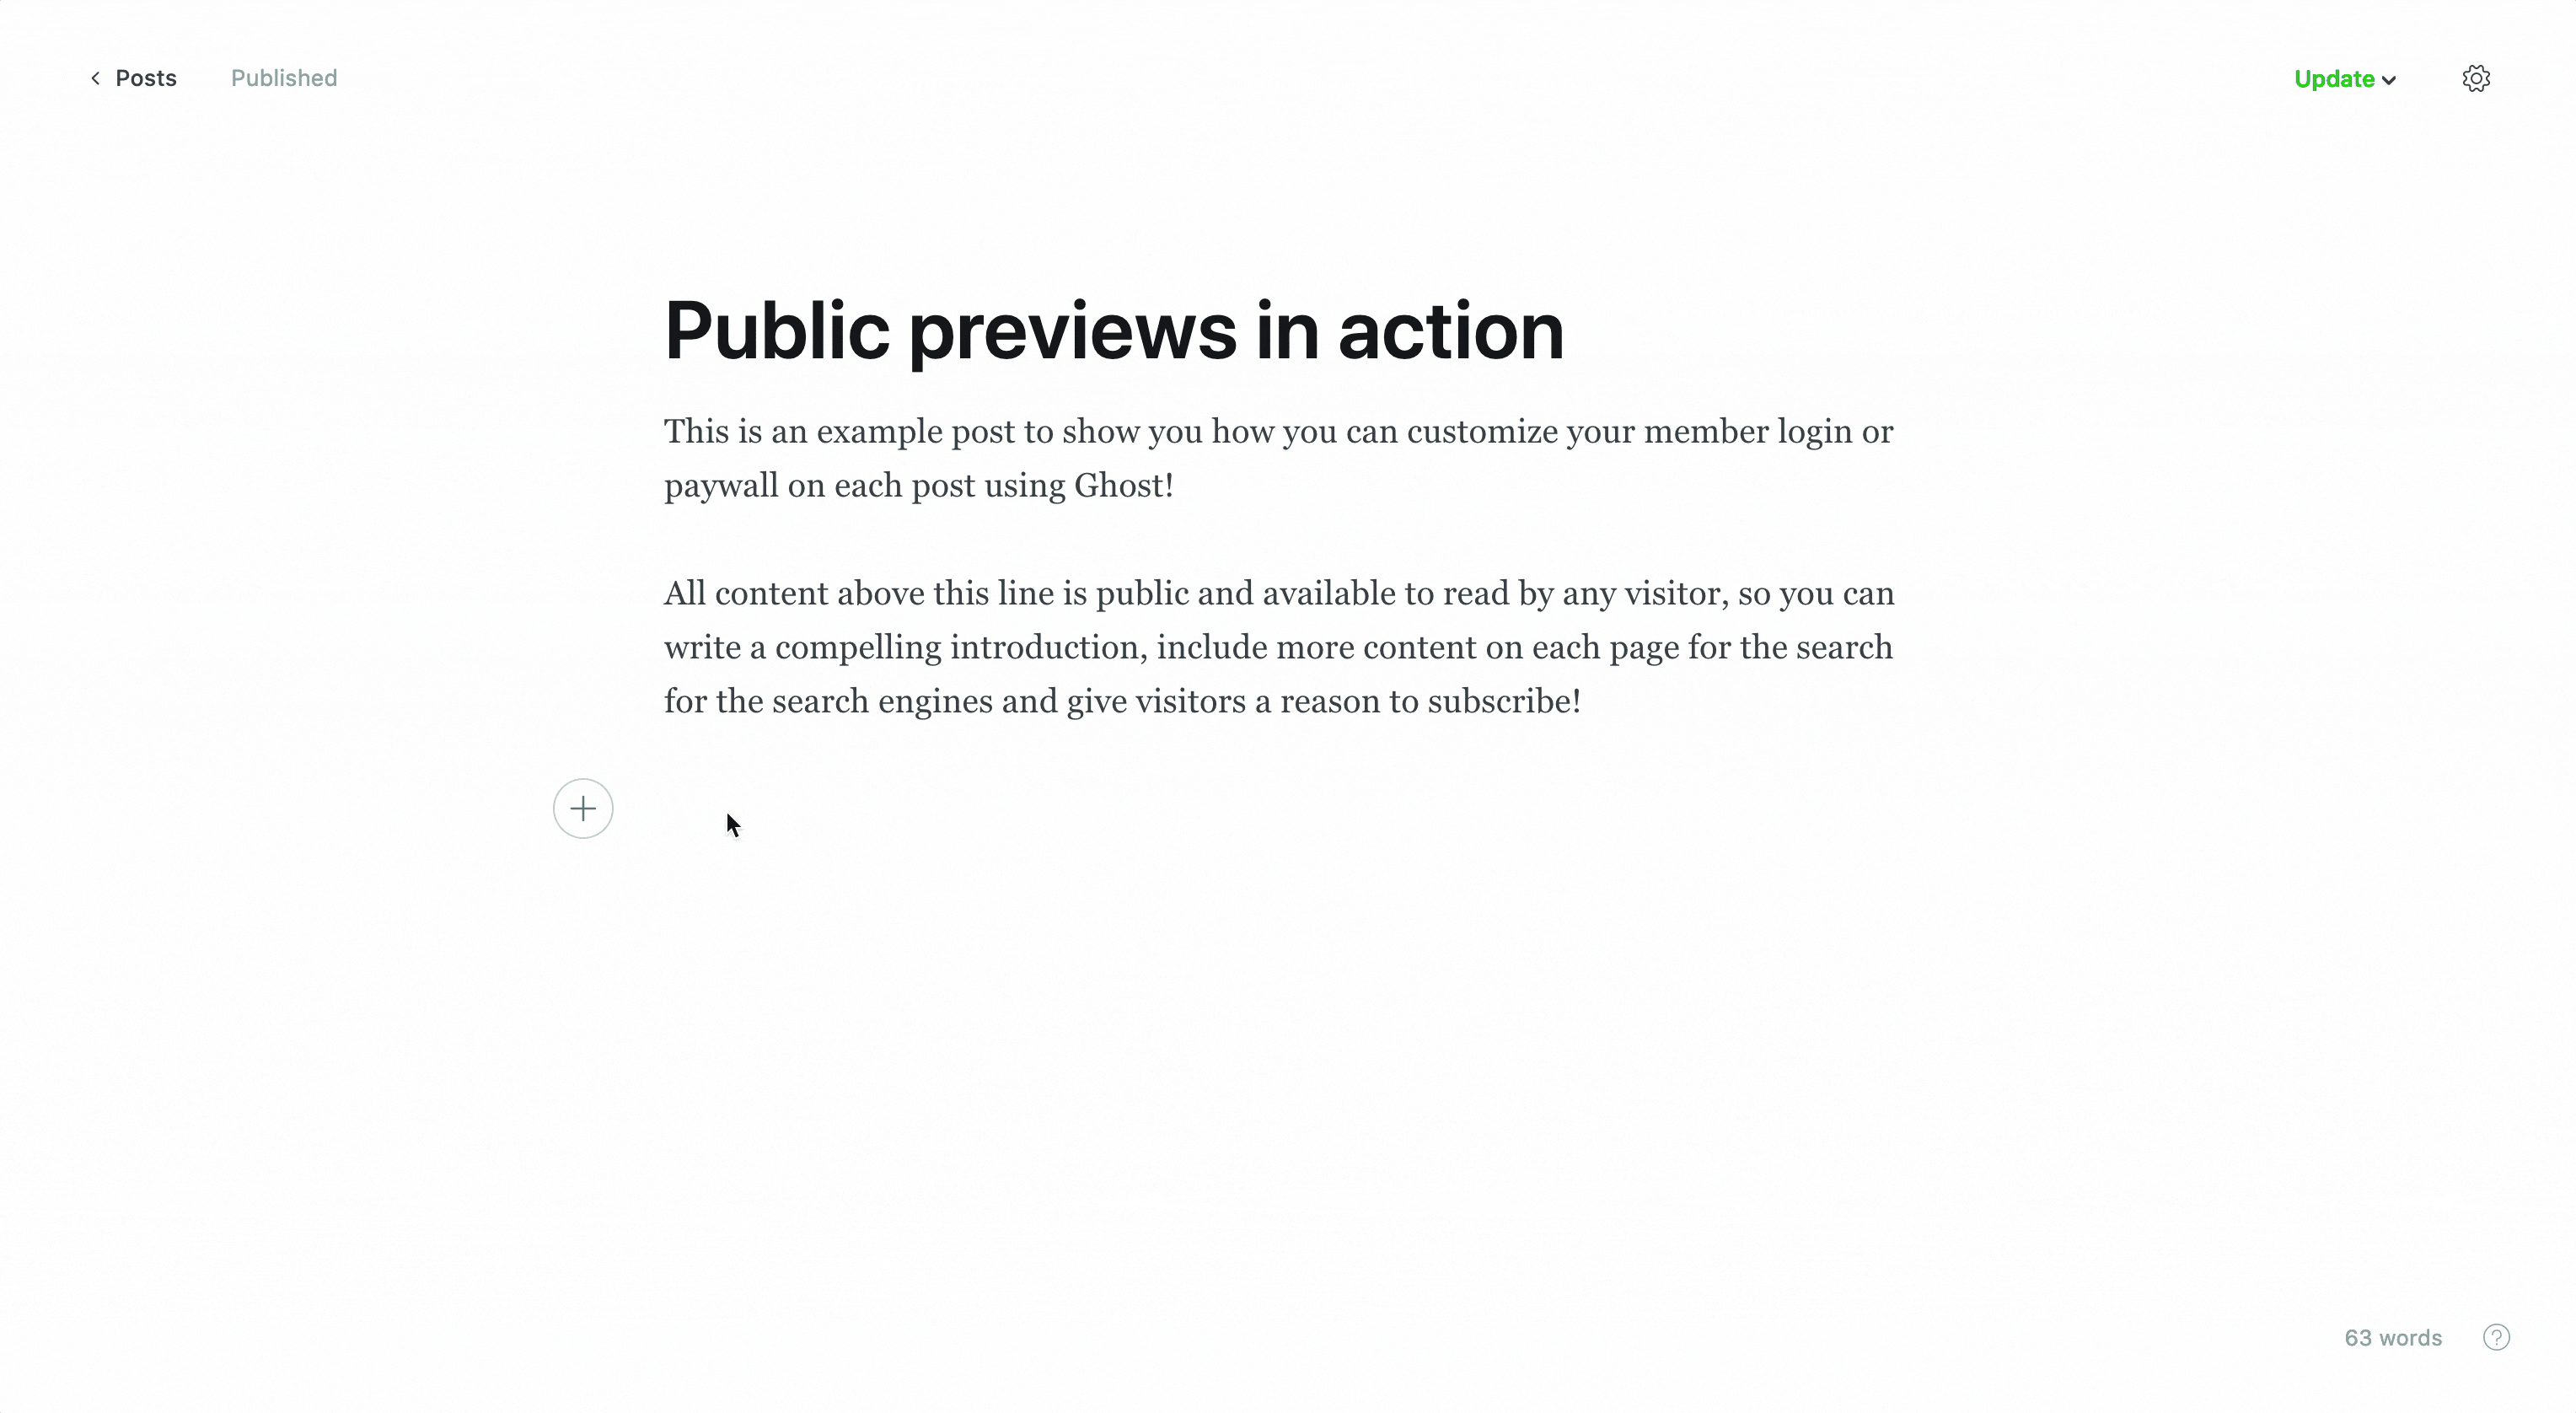 public previews feature in Ghost